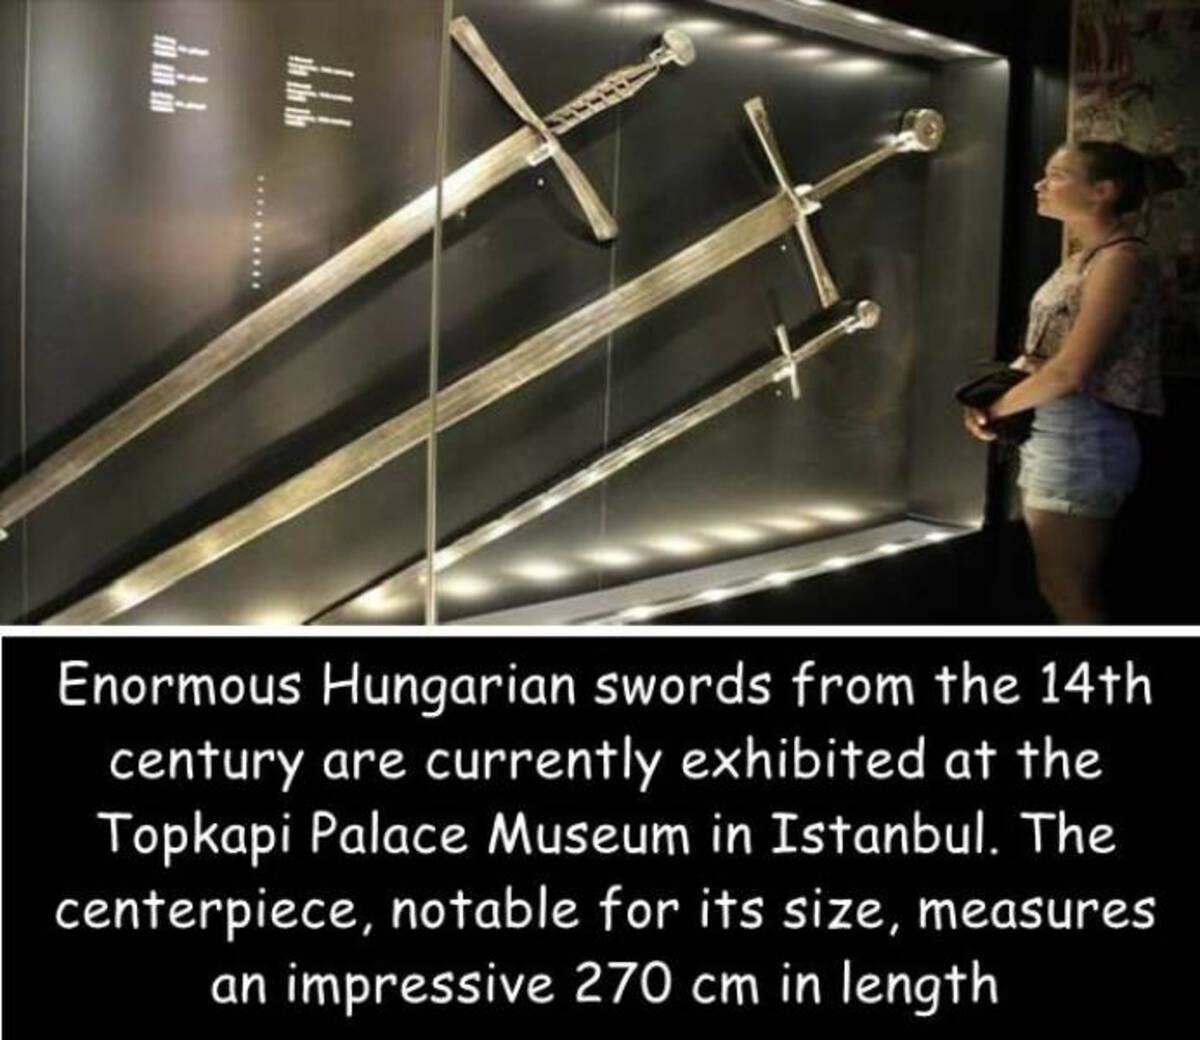 lighting - !!! Enormous Hungarian swords from the 14th century are currently exhibited at the Topkapi Palace Museum in Istanbul. The centerpiece, notable for its size, measures an impressive 270 cm in length